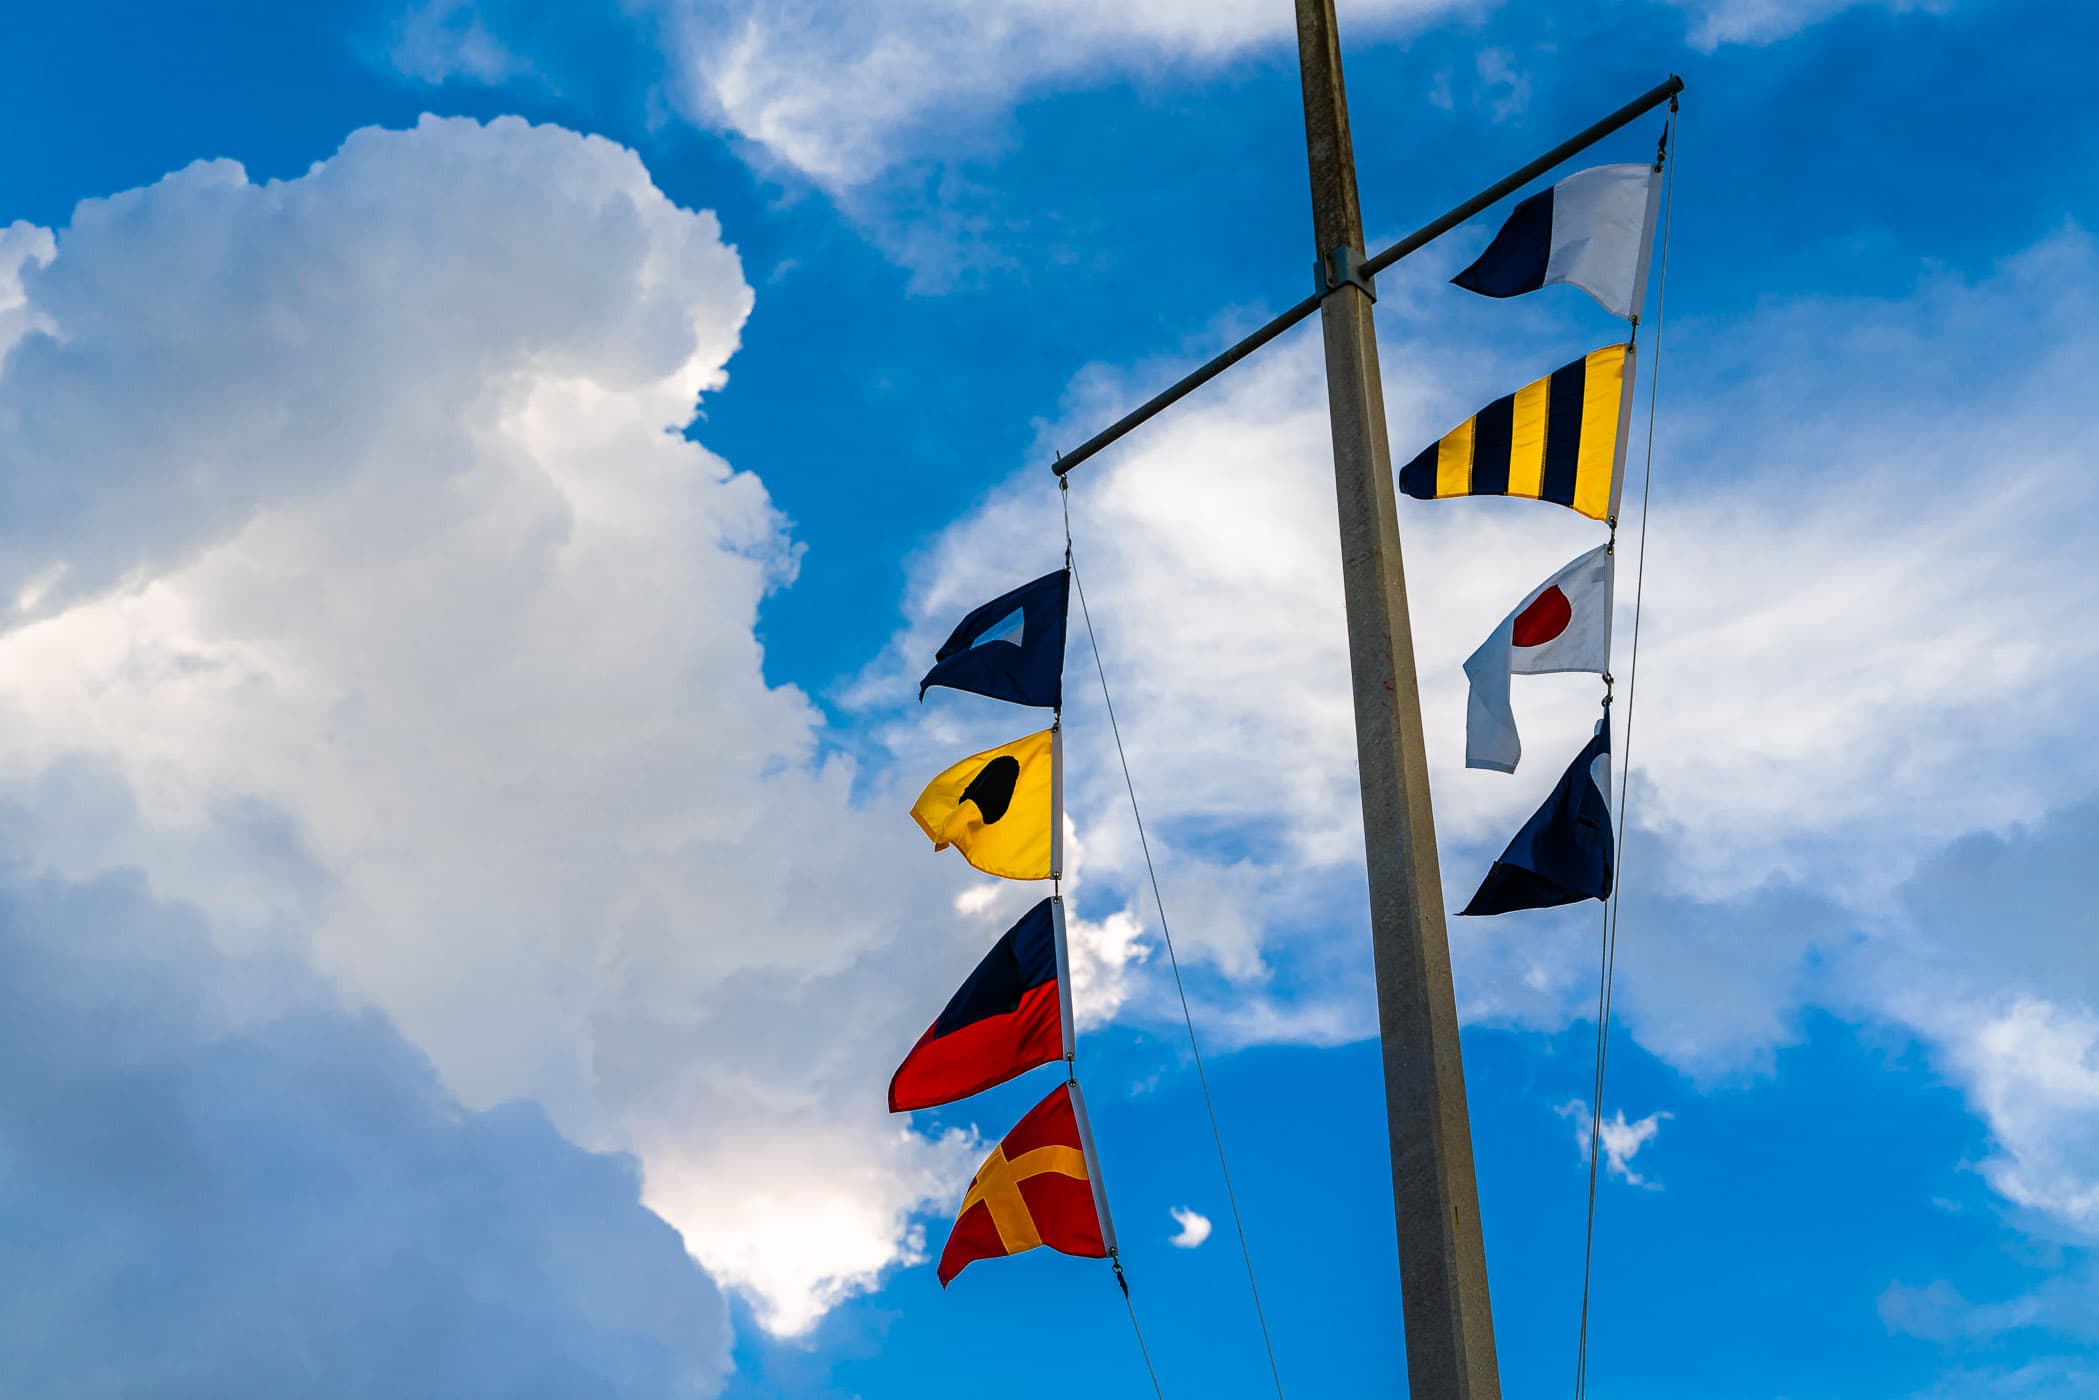 Maritime flags flutter in the breeze in Galveston, Texas.